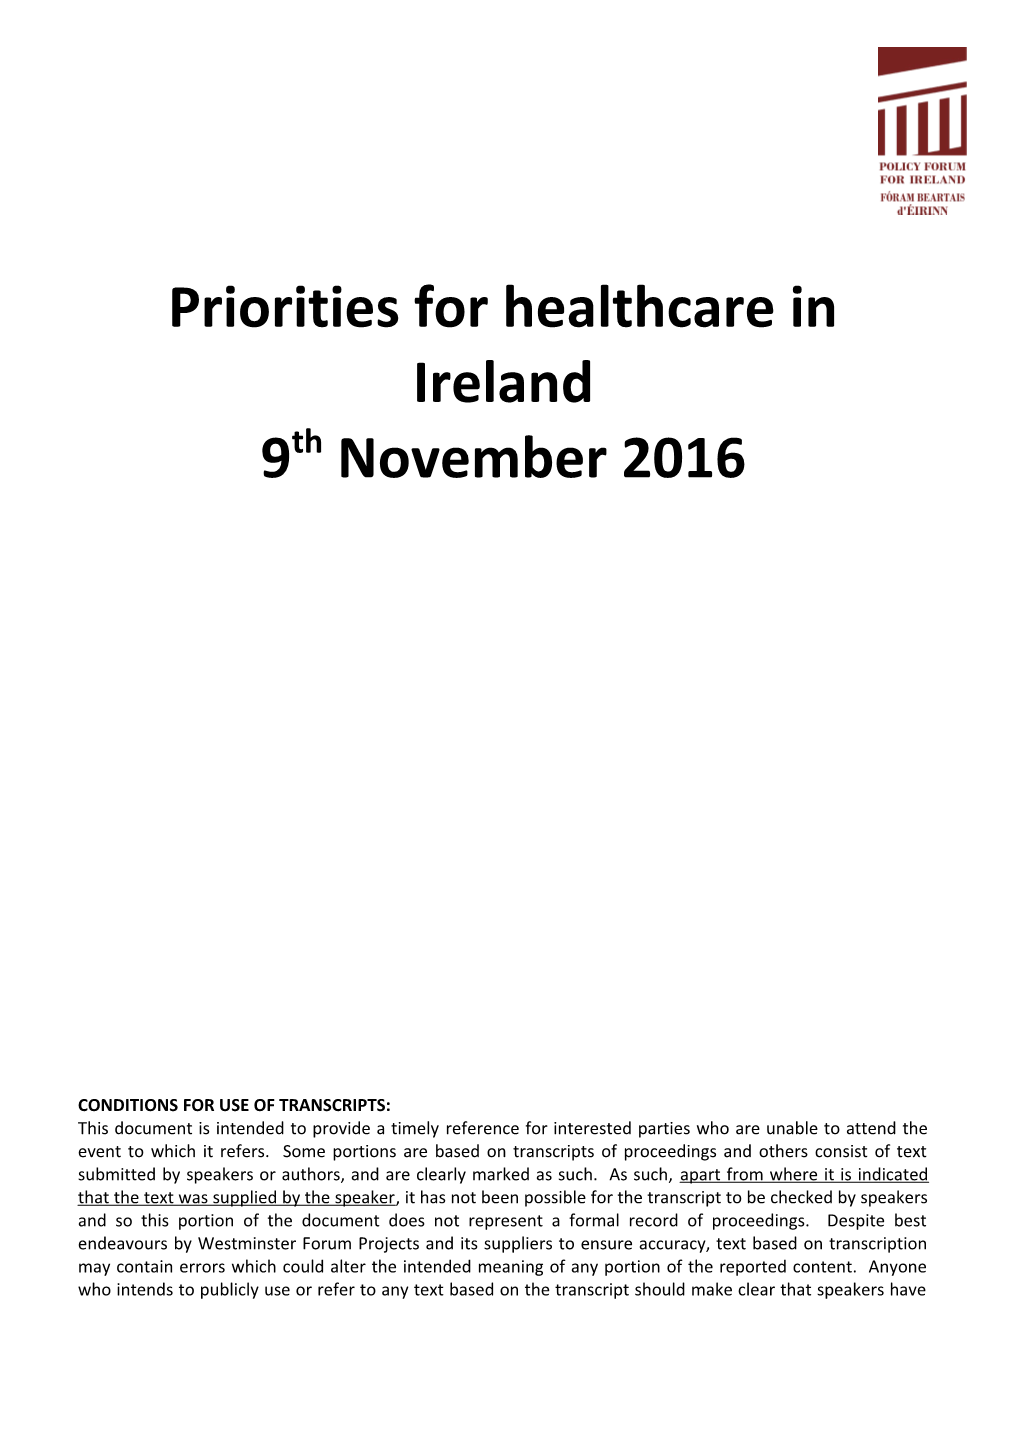 Policy Forum for Ireland Keynote Seminar: Priorities for Healthcare in Ireland9th November